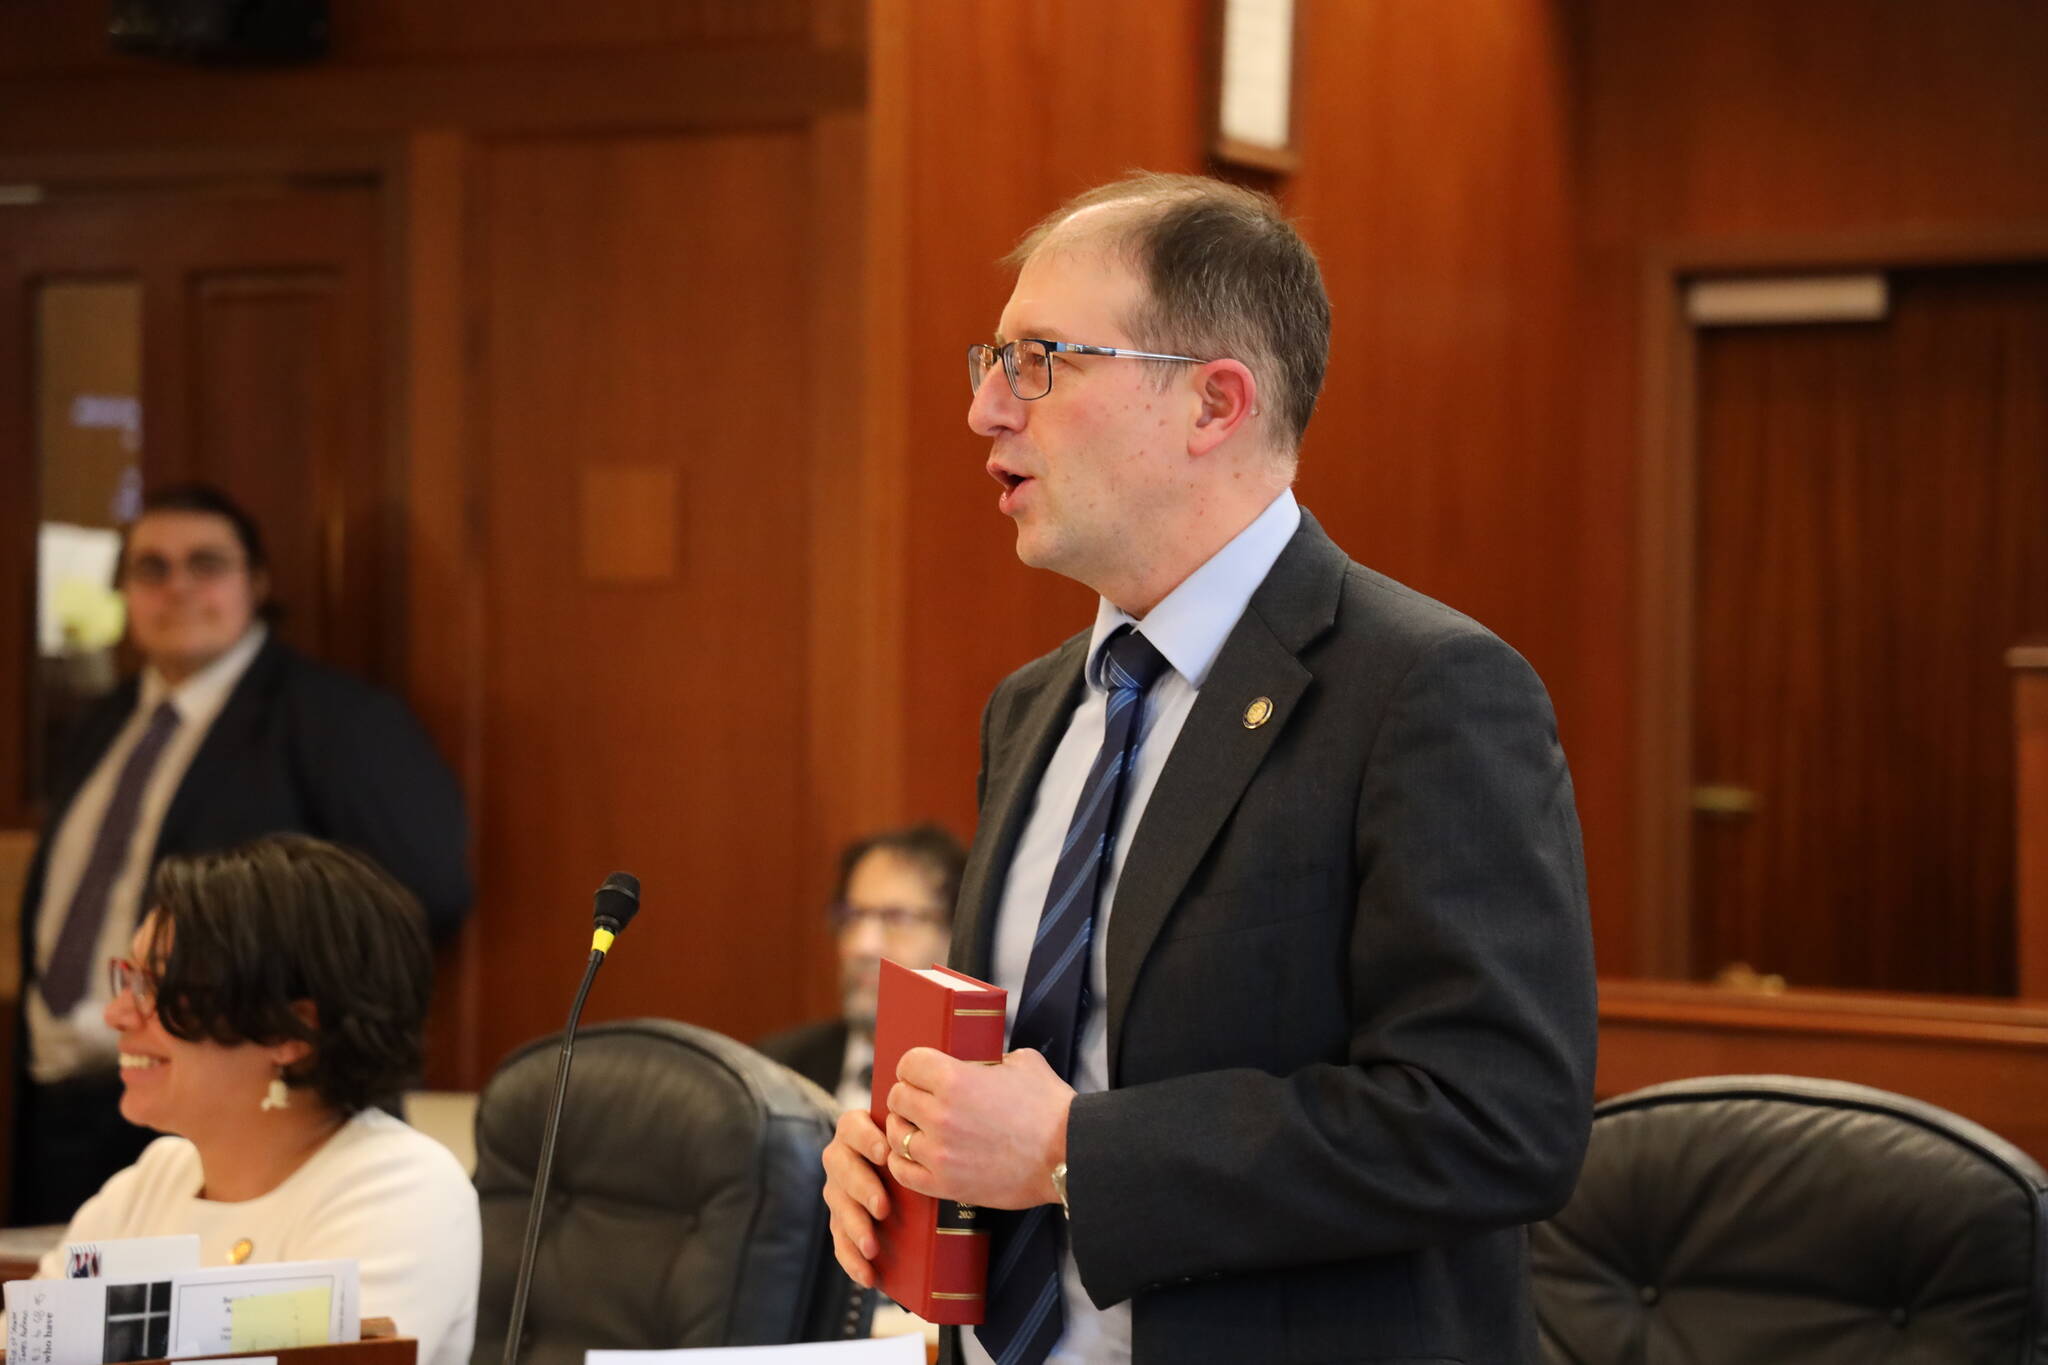 State Sen. Jesse Kiehl, D-Juneau, speaks on the Senate floor May 16. His bill allowing disabled military veterans to receive free fur-trapping licenses was signed into law last week by Gov. Mike Dunleavy. (Clarise Larson / Juneau Empire)